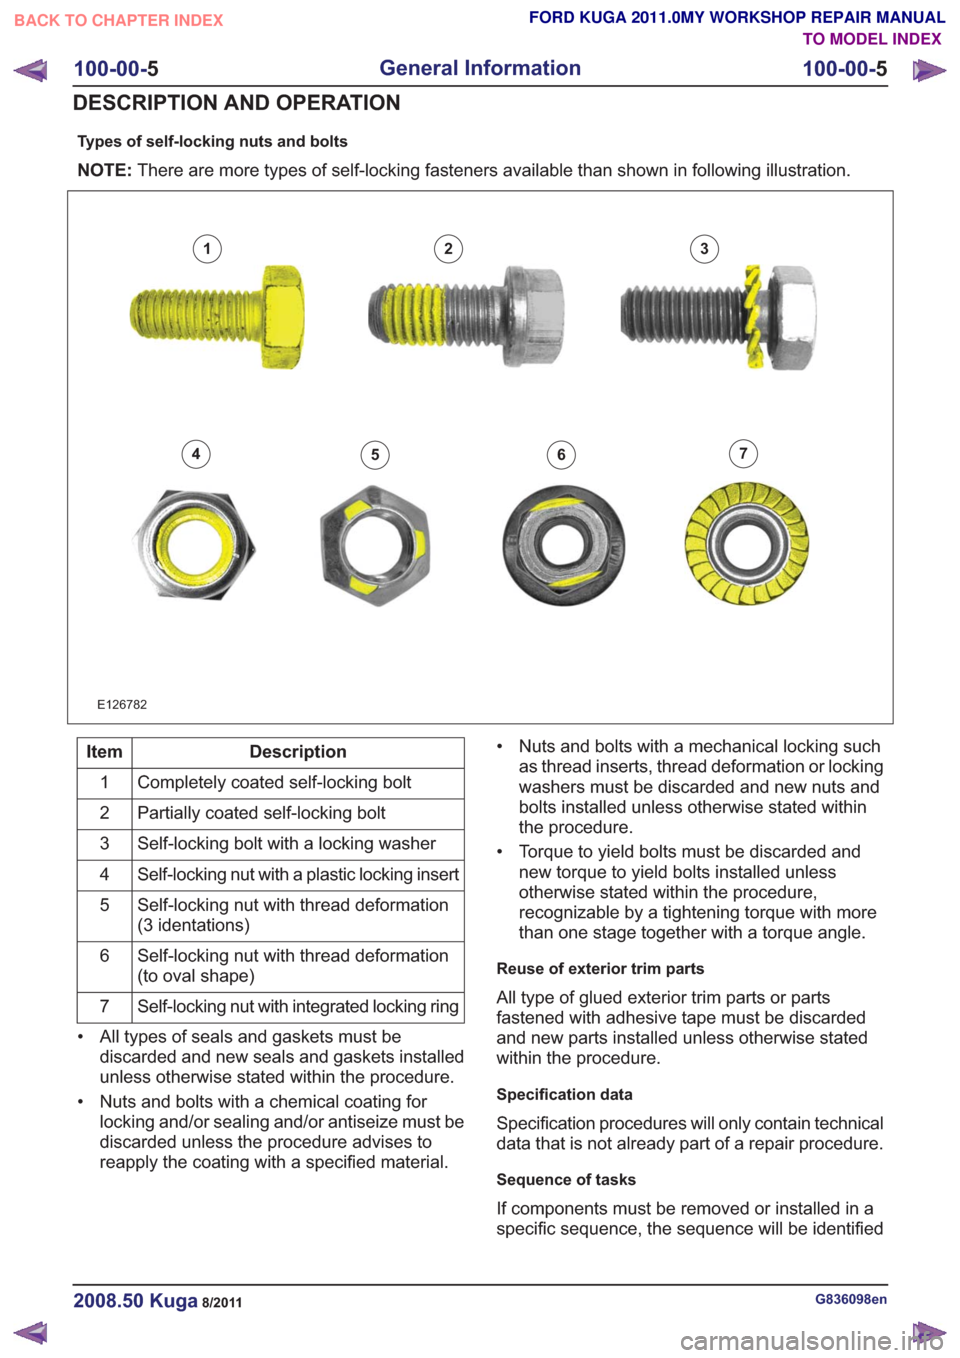 FORD KUGA 2011 1.G Workshop Manual Types of self-locking nuts and bolts
NOTE:There are more types of self-locking fasteners available than shown in following illustration.
E126782
123
4567
Description
Item
Completely coated self-lockin